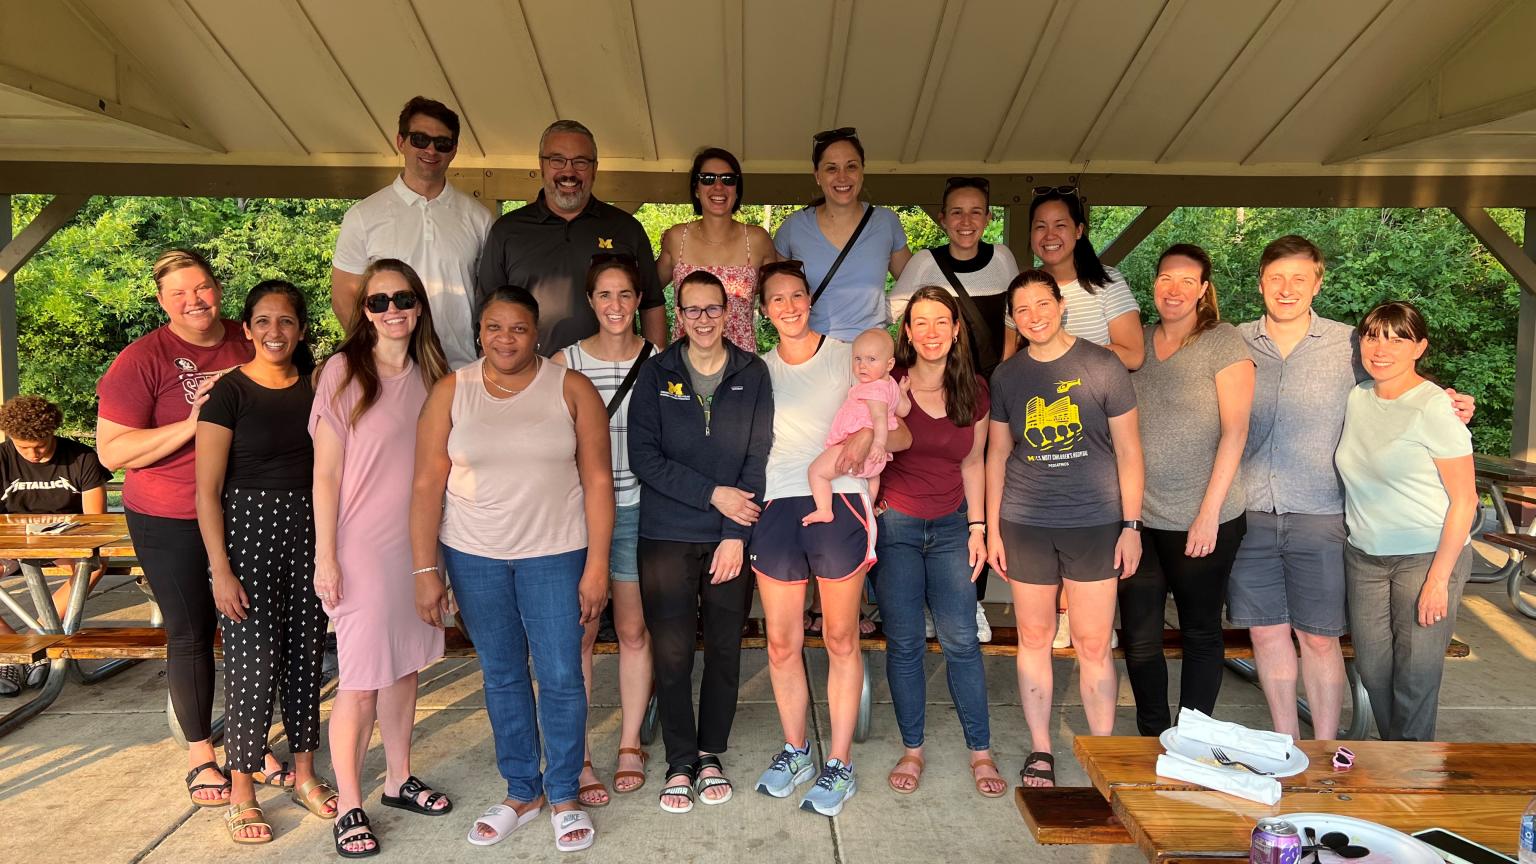 Group of Pediatric Hospital Medicine Fellows standing together smiling at a picnic.